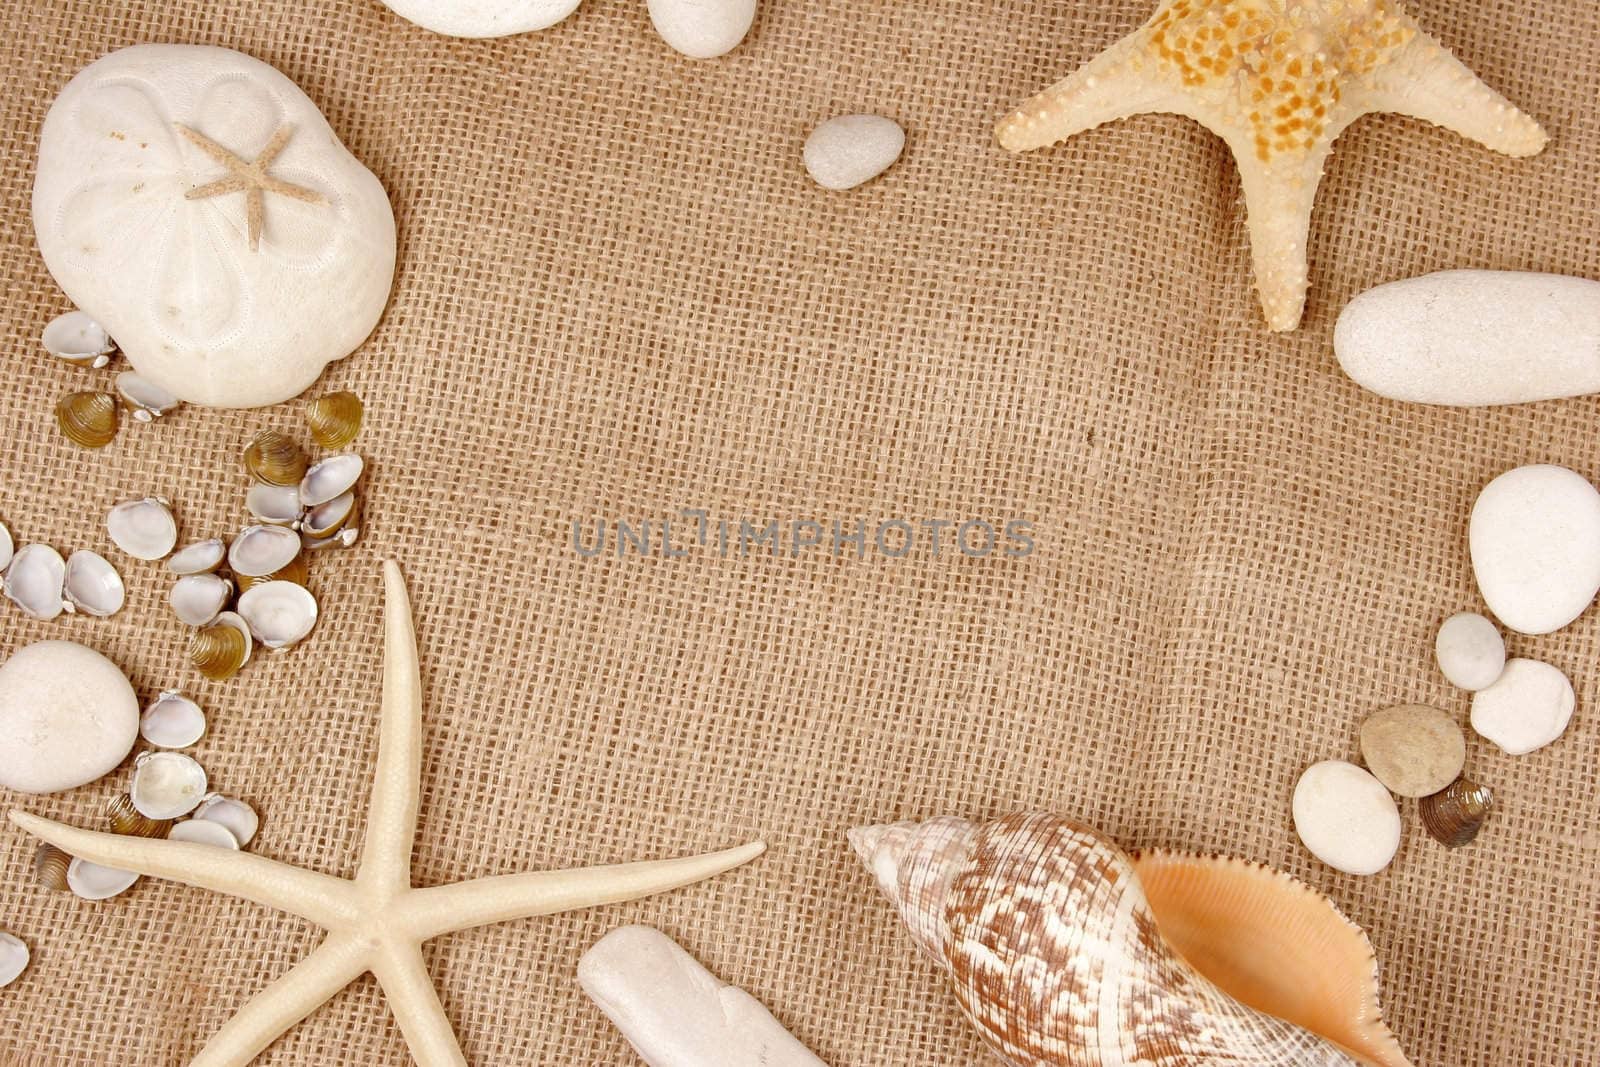 Beach postcard with sea shell and star fish on a burlap